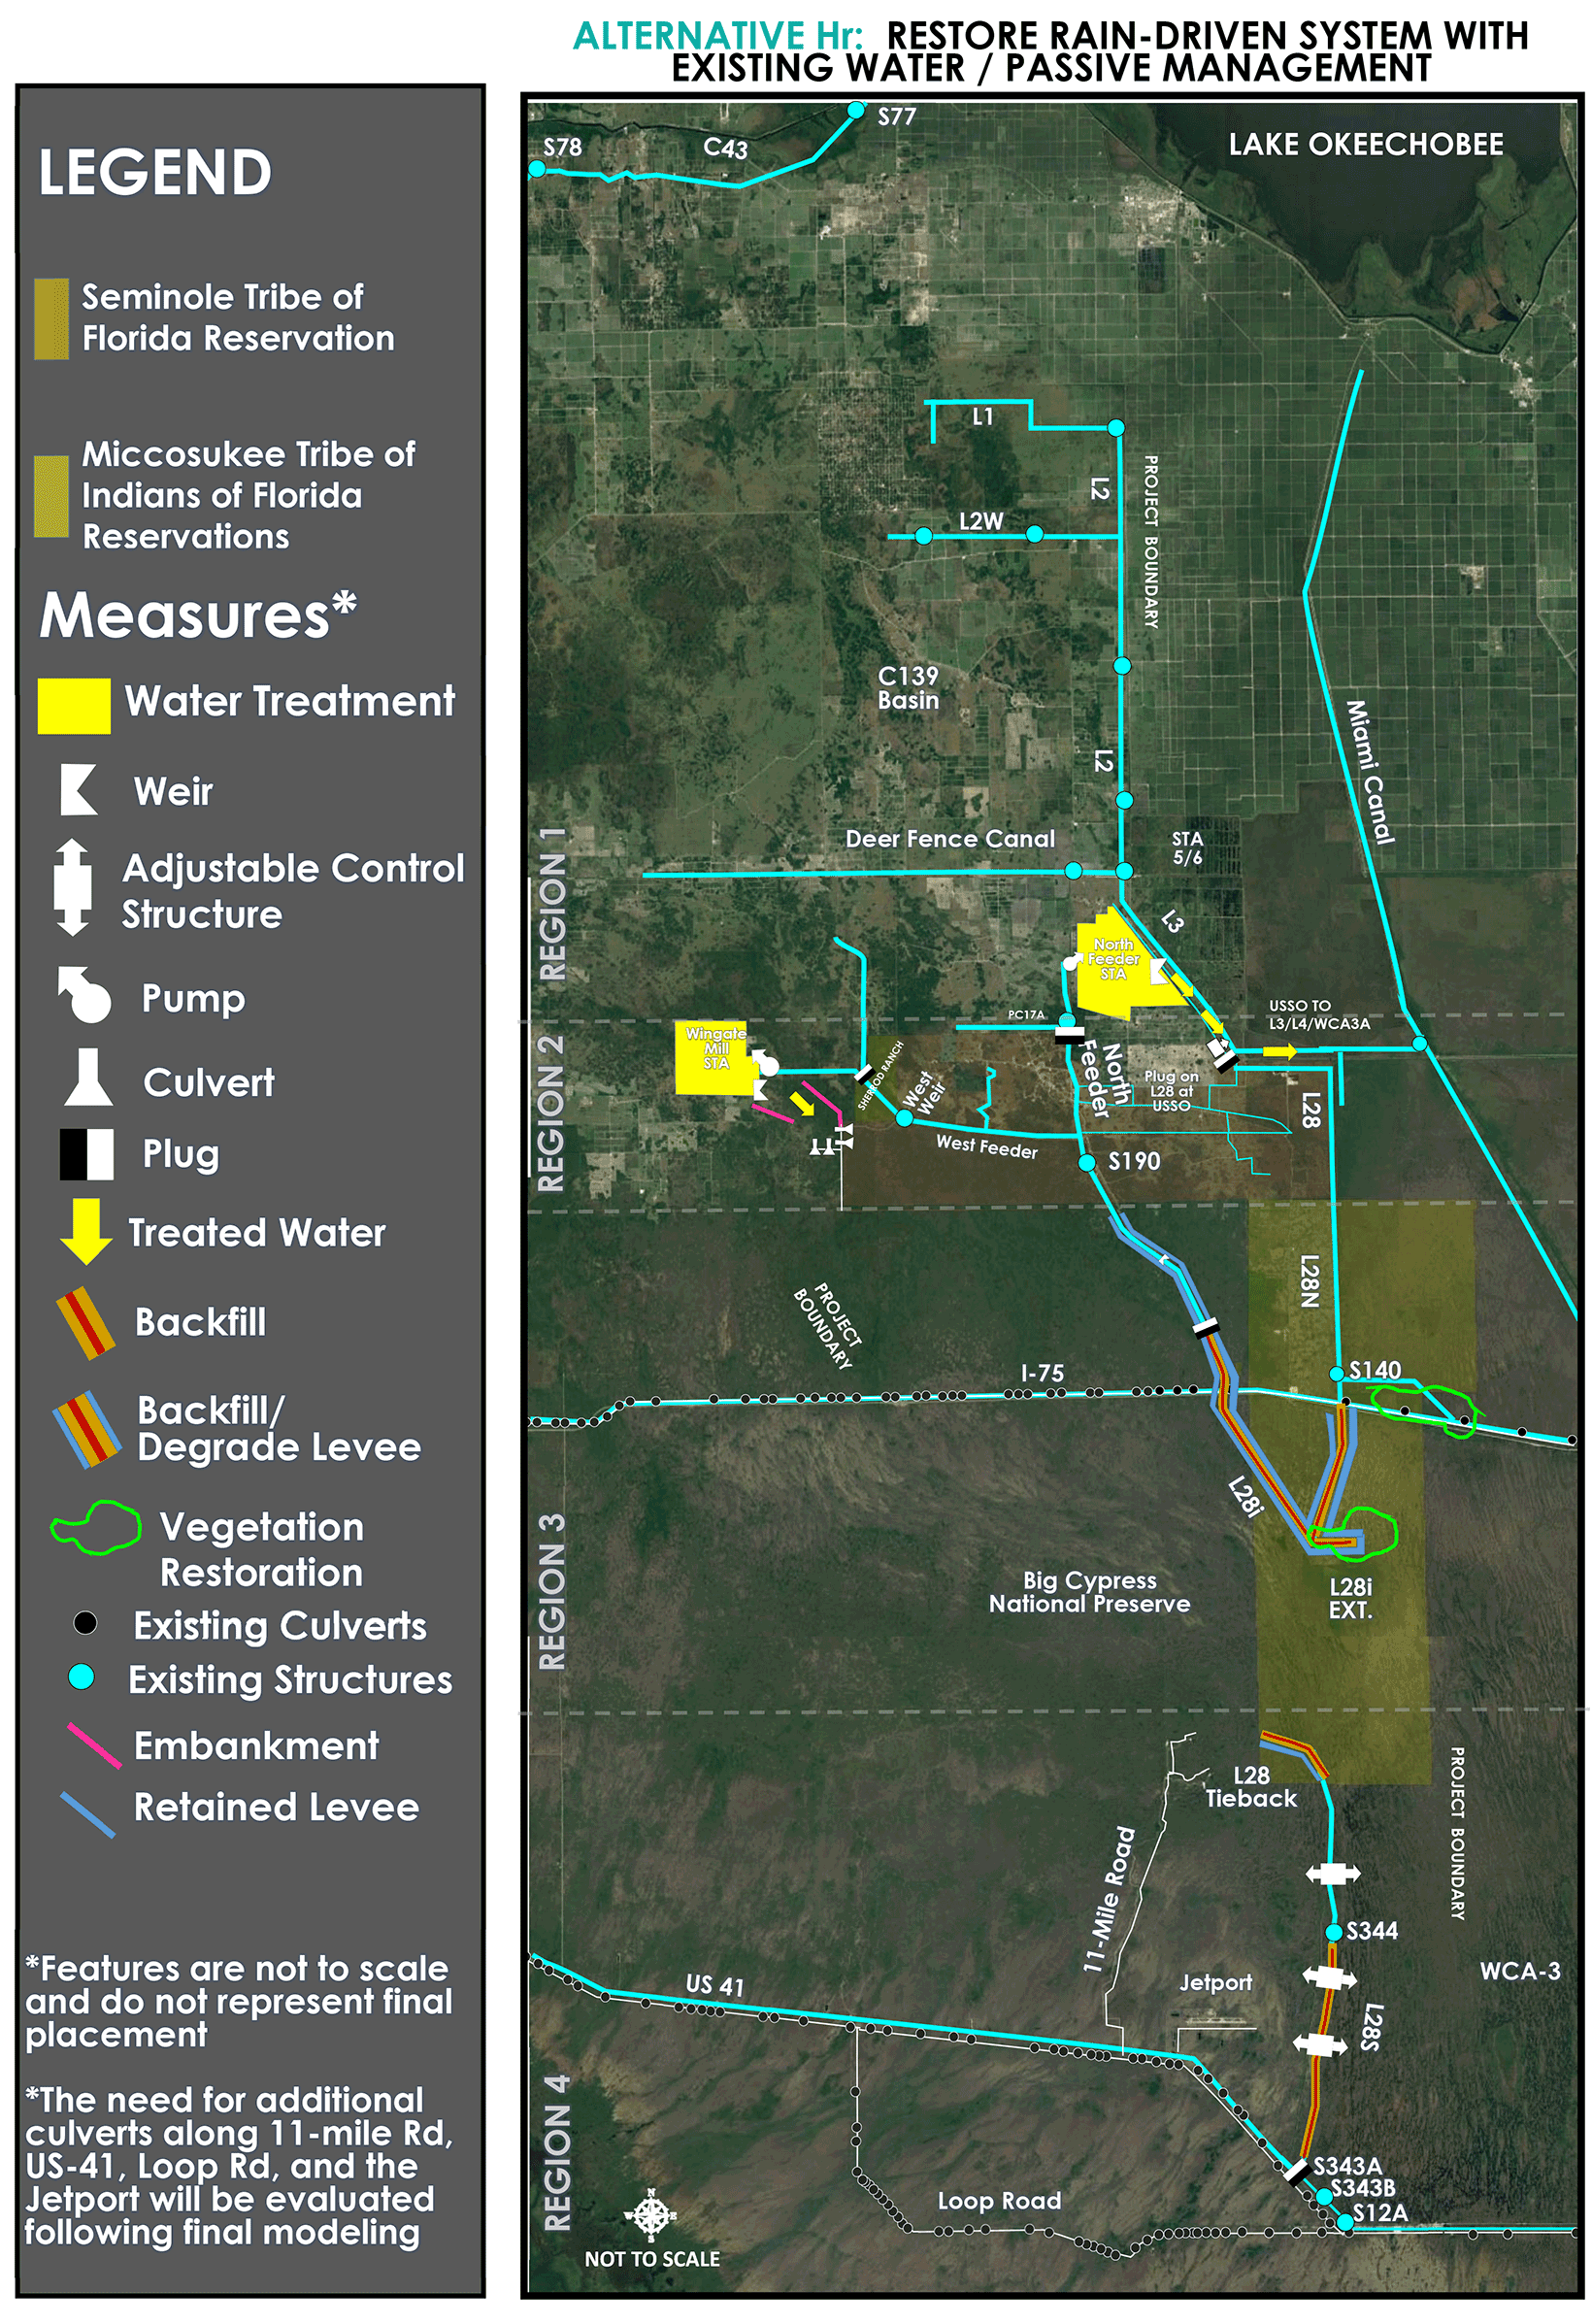 This map shows the WERP project area, with overlays indicating tribal lands of the Seminole and Miccosukee tribes, and proposed features and their locations in Alternative Hr, the tentatively selected plan. Features are not to scale, and do not represent final placement. The need for additional culverts along 11-Mile road, US-41, Loop Road, and the Jetport will be evaluated following final modeling. 